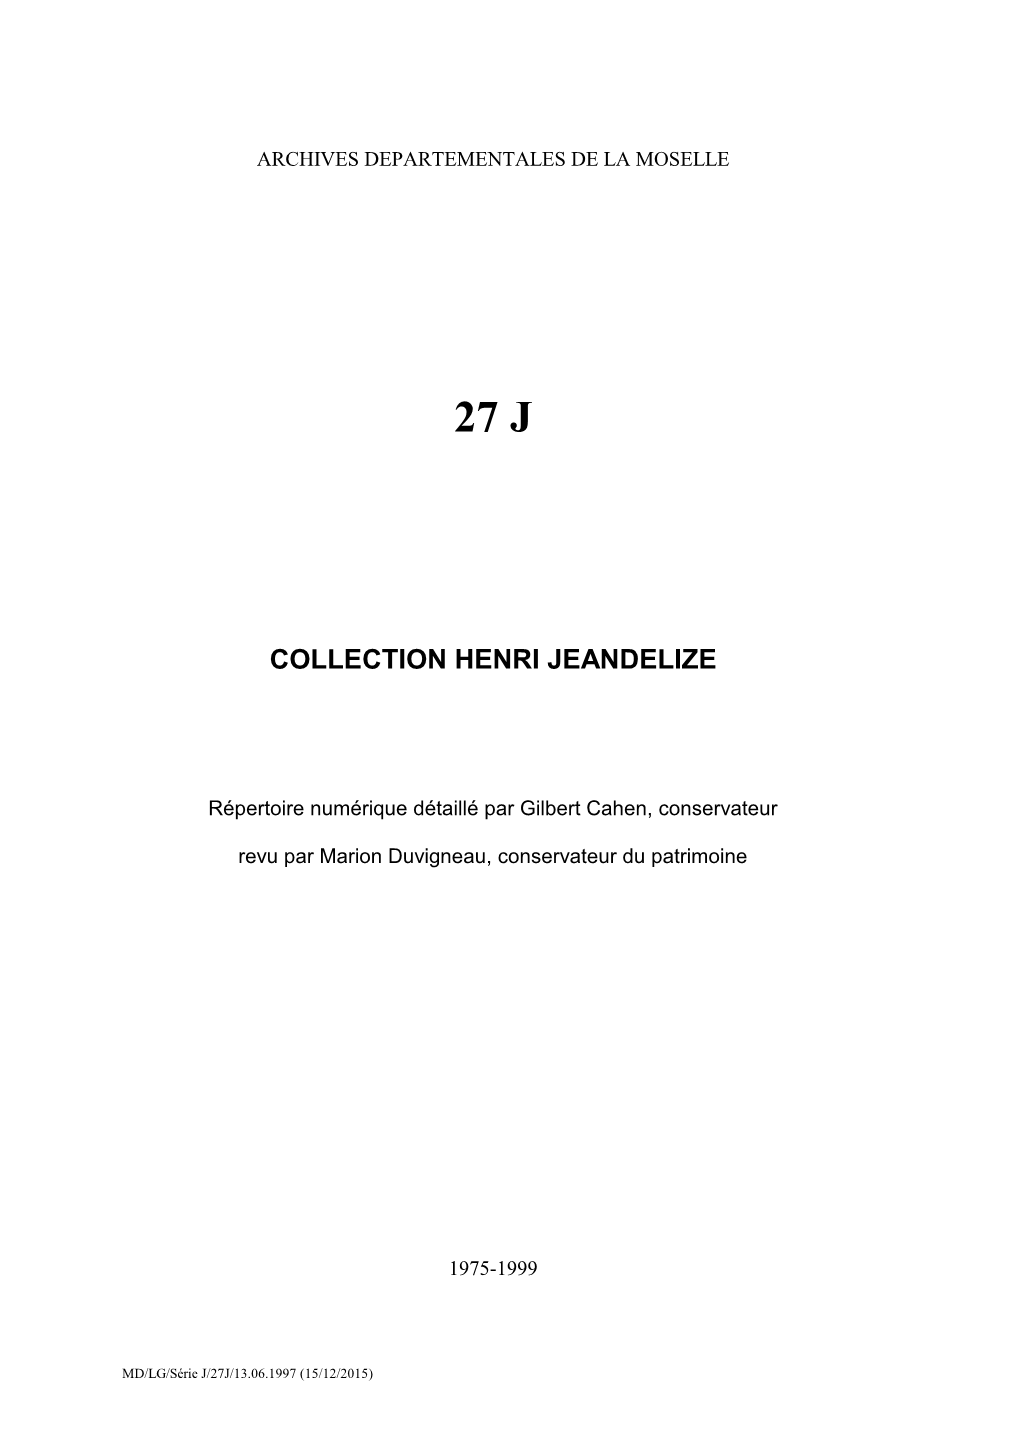 Collection JEANDELIZE